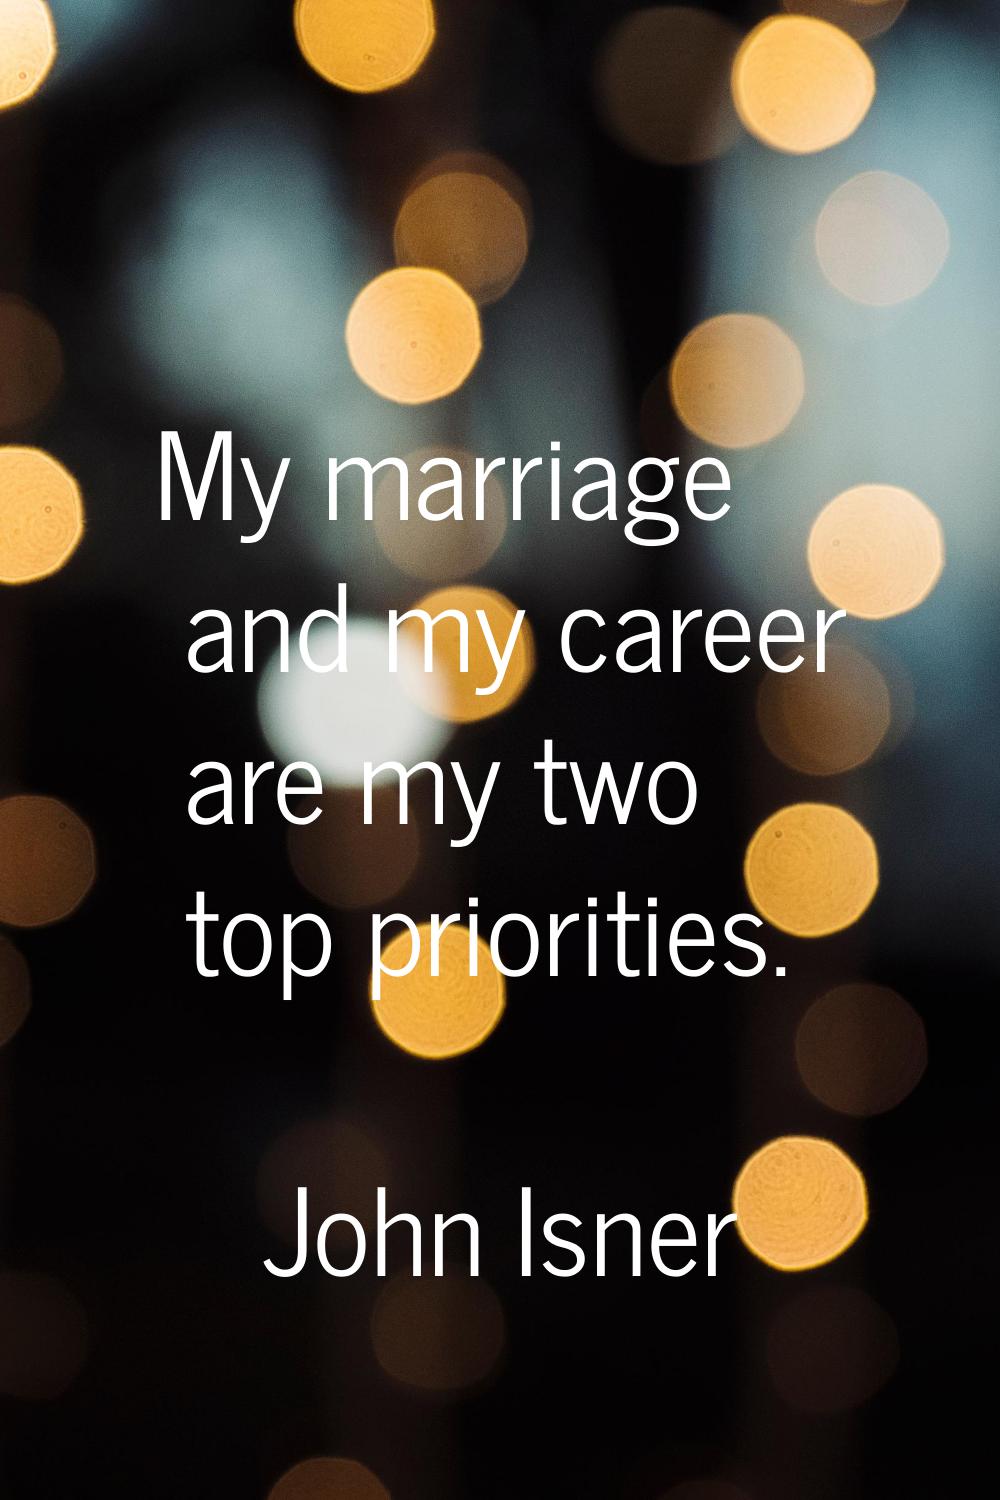 My marriage and my career are my two top priorities.